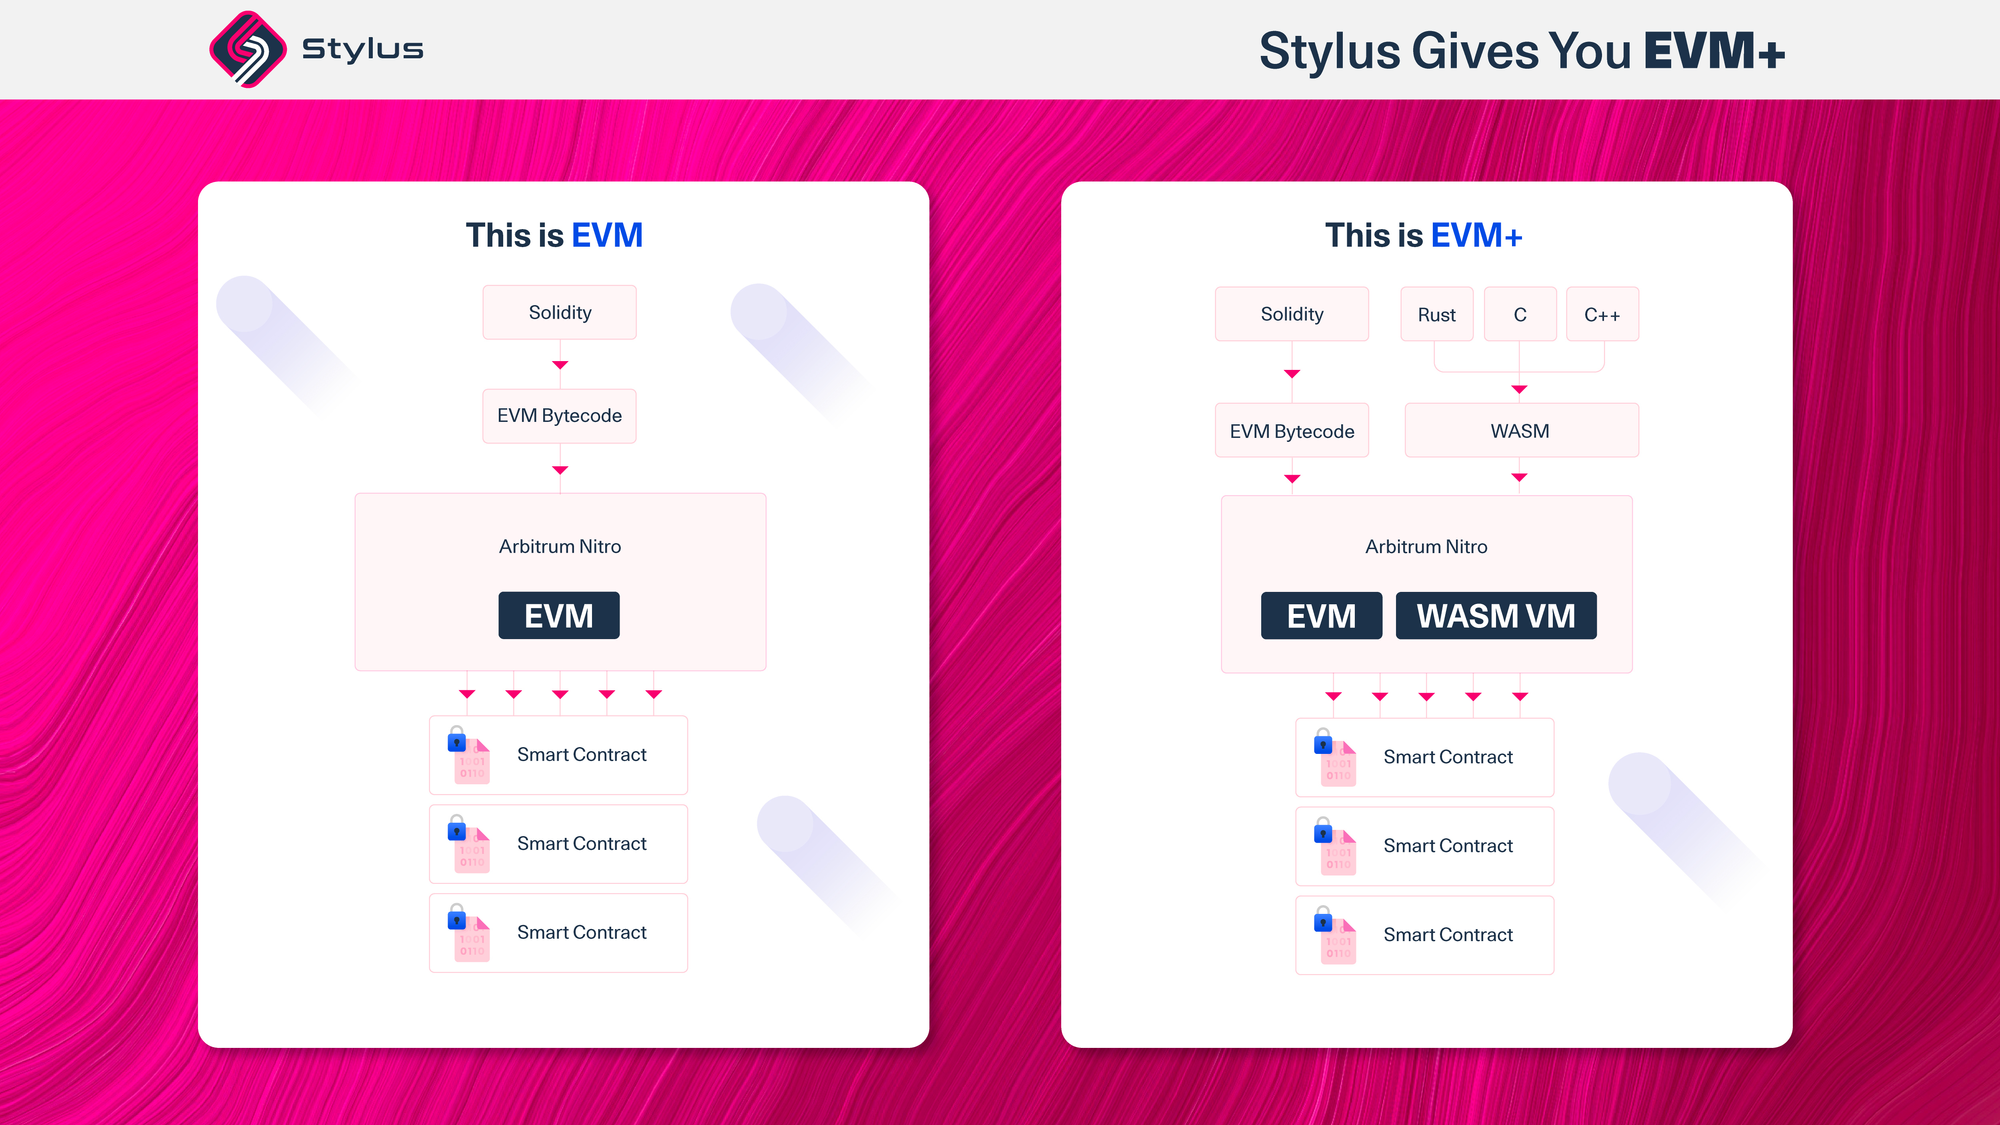 Stylus gives you EVM+